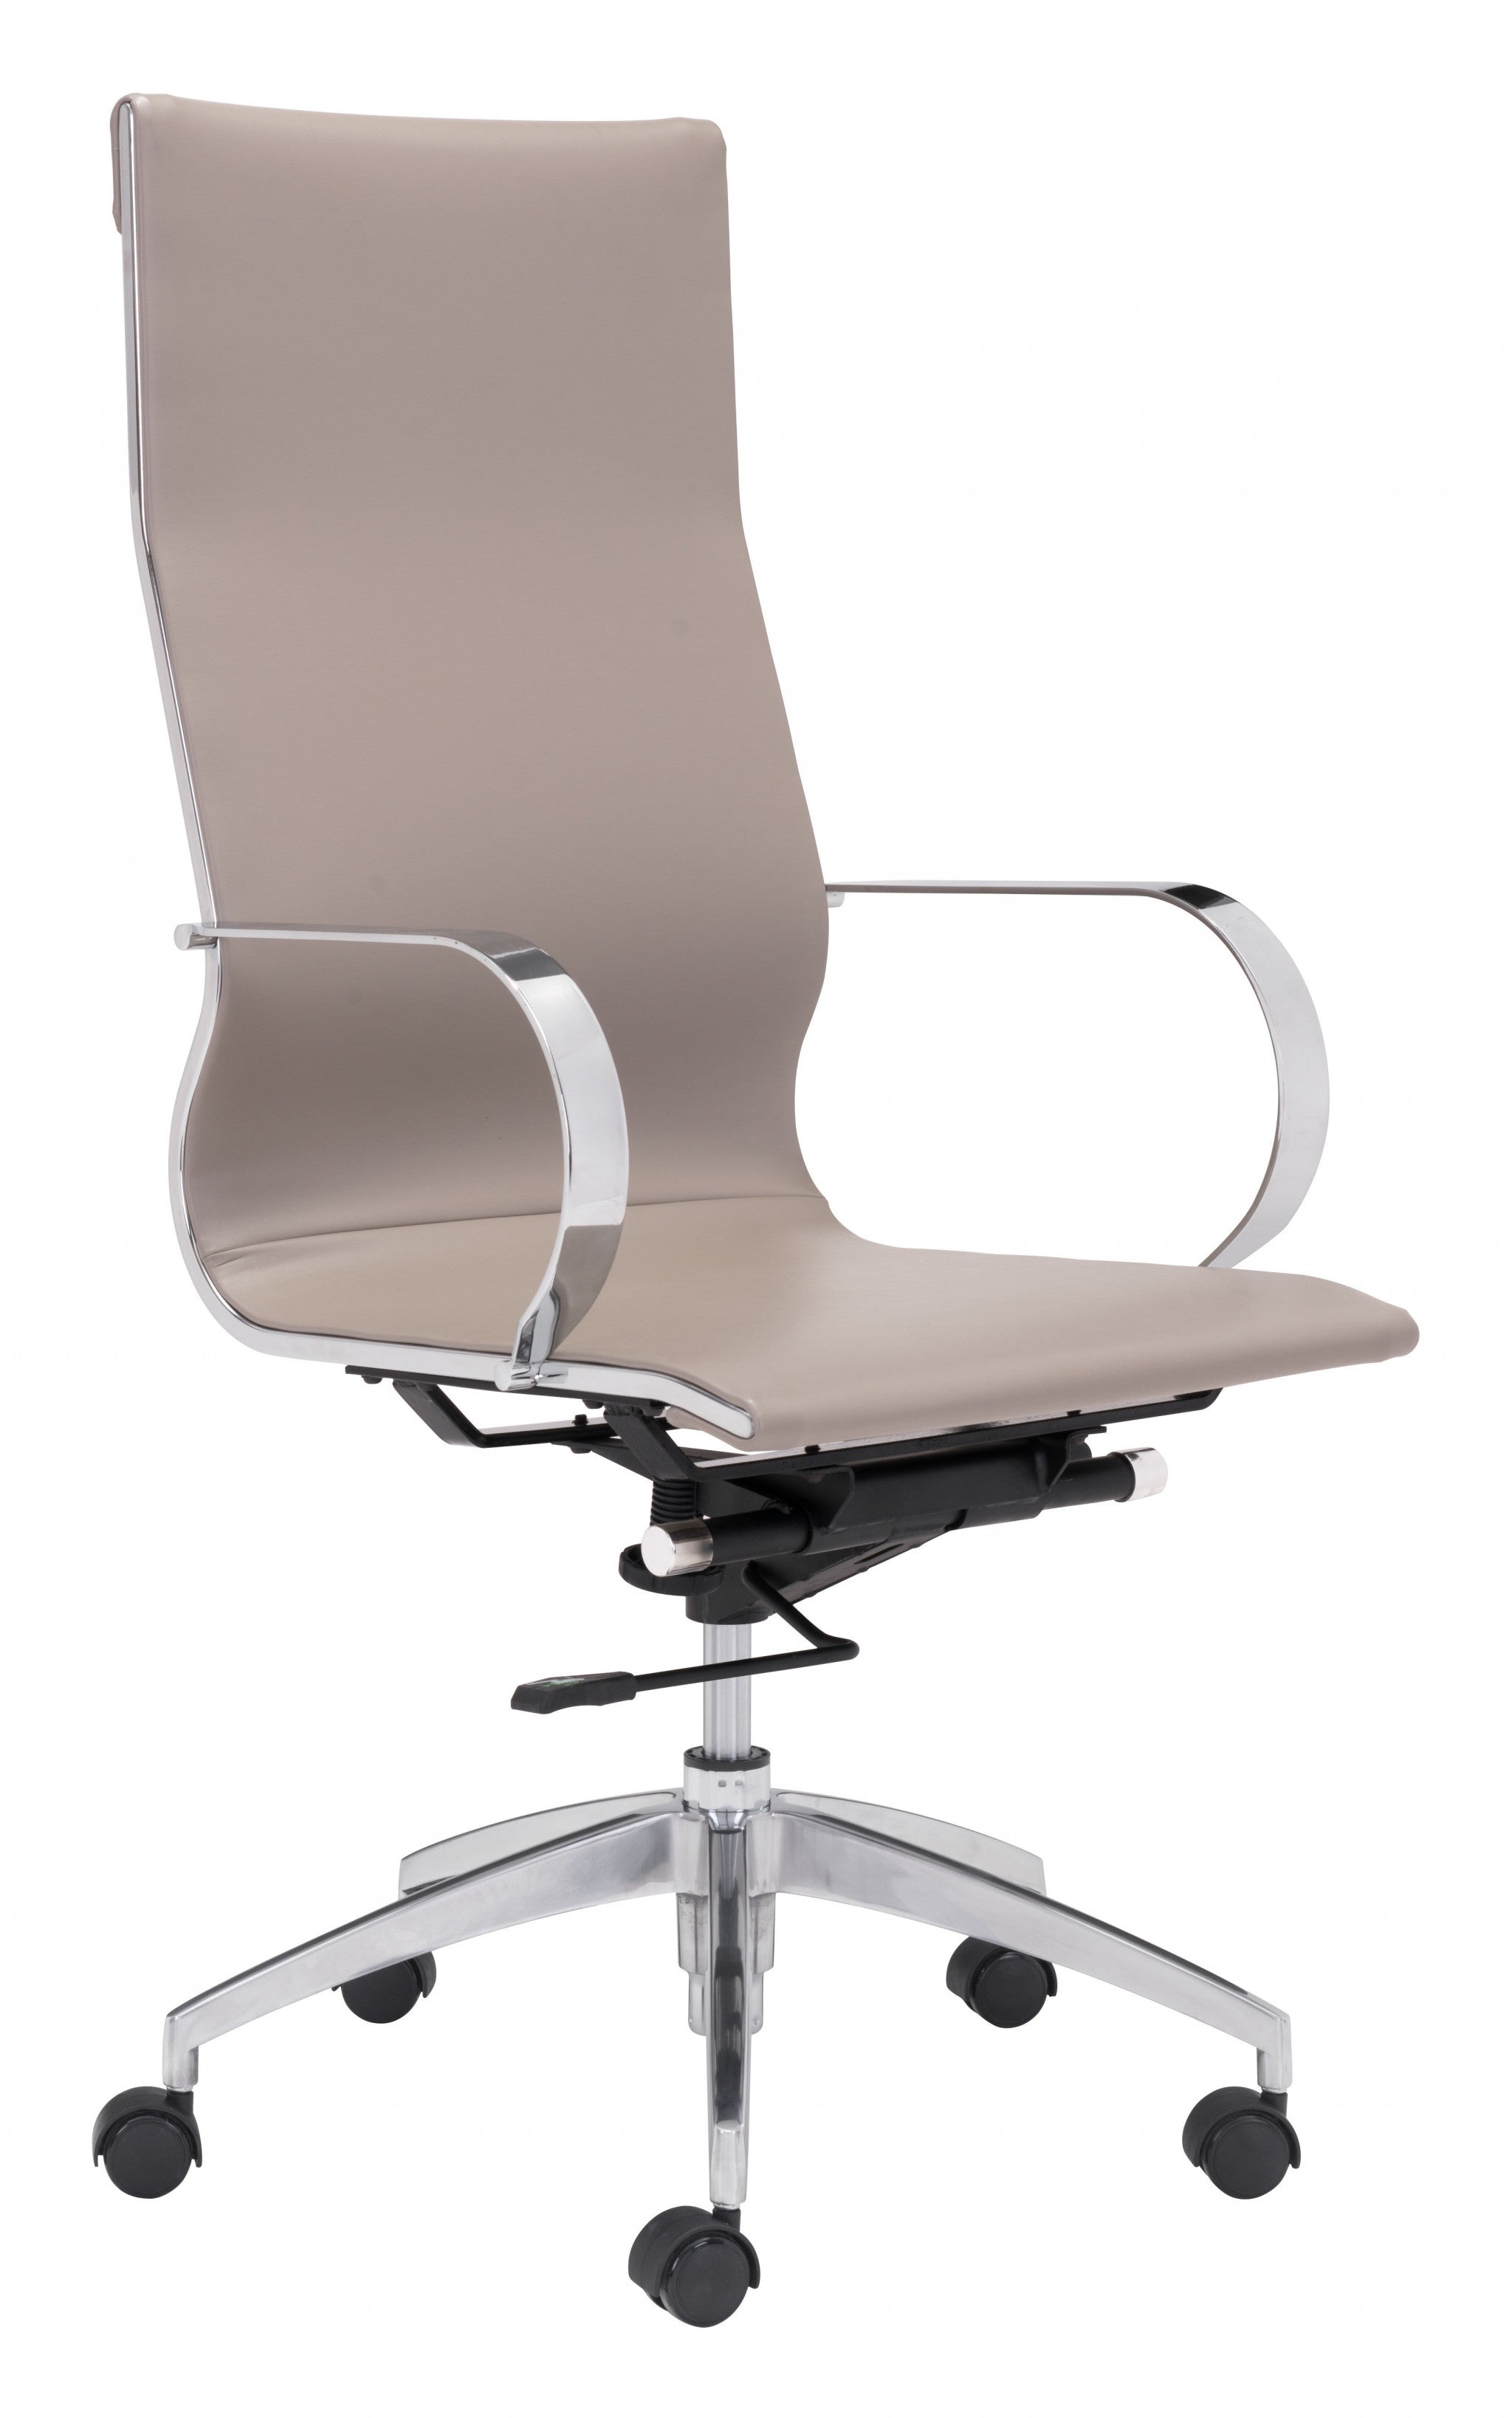 Taupe Faux Leather Seat Swivel Adjustable Conference Chair Metal Back Steel Frame